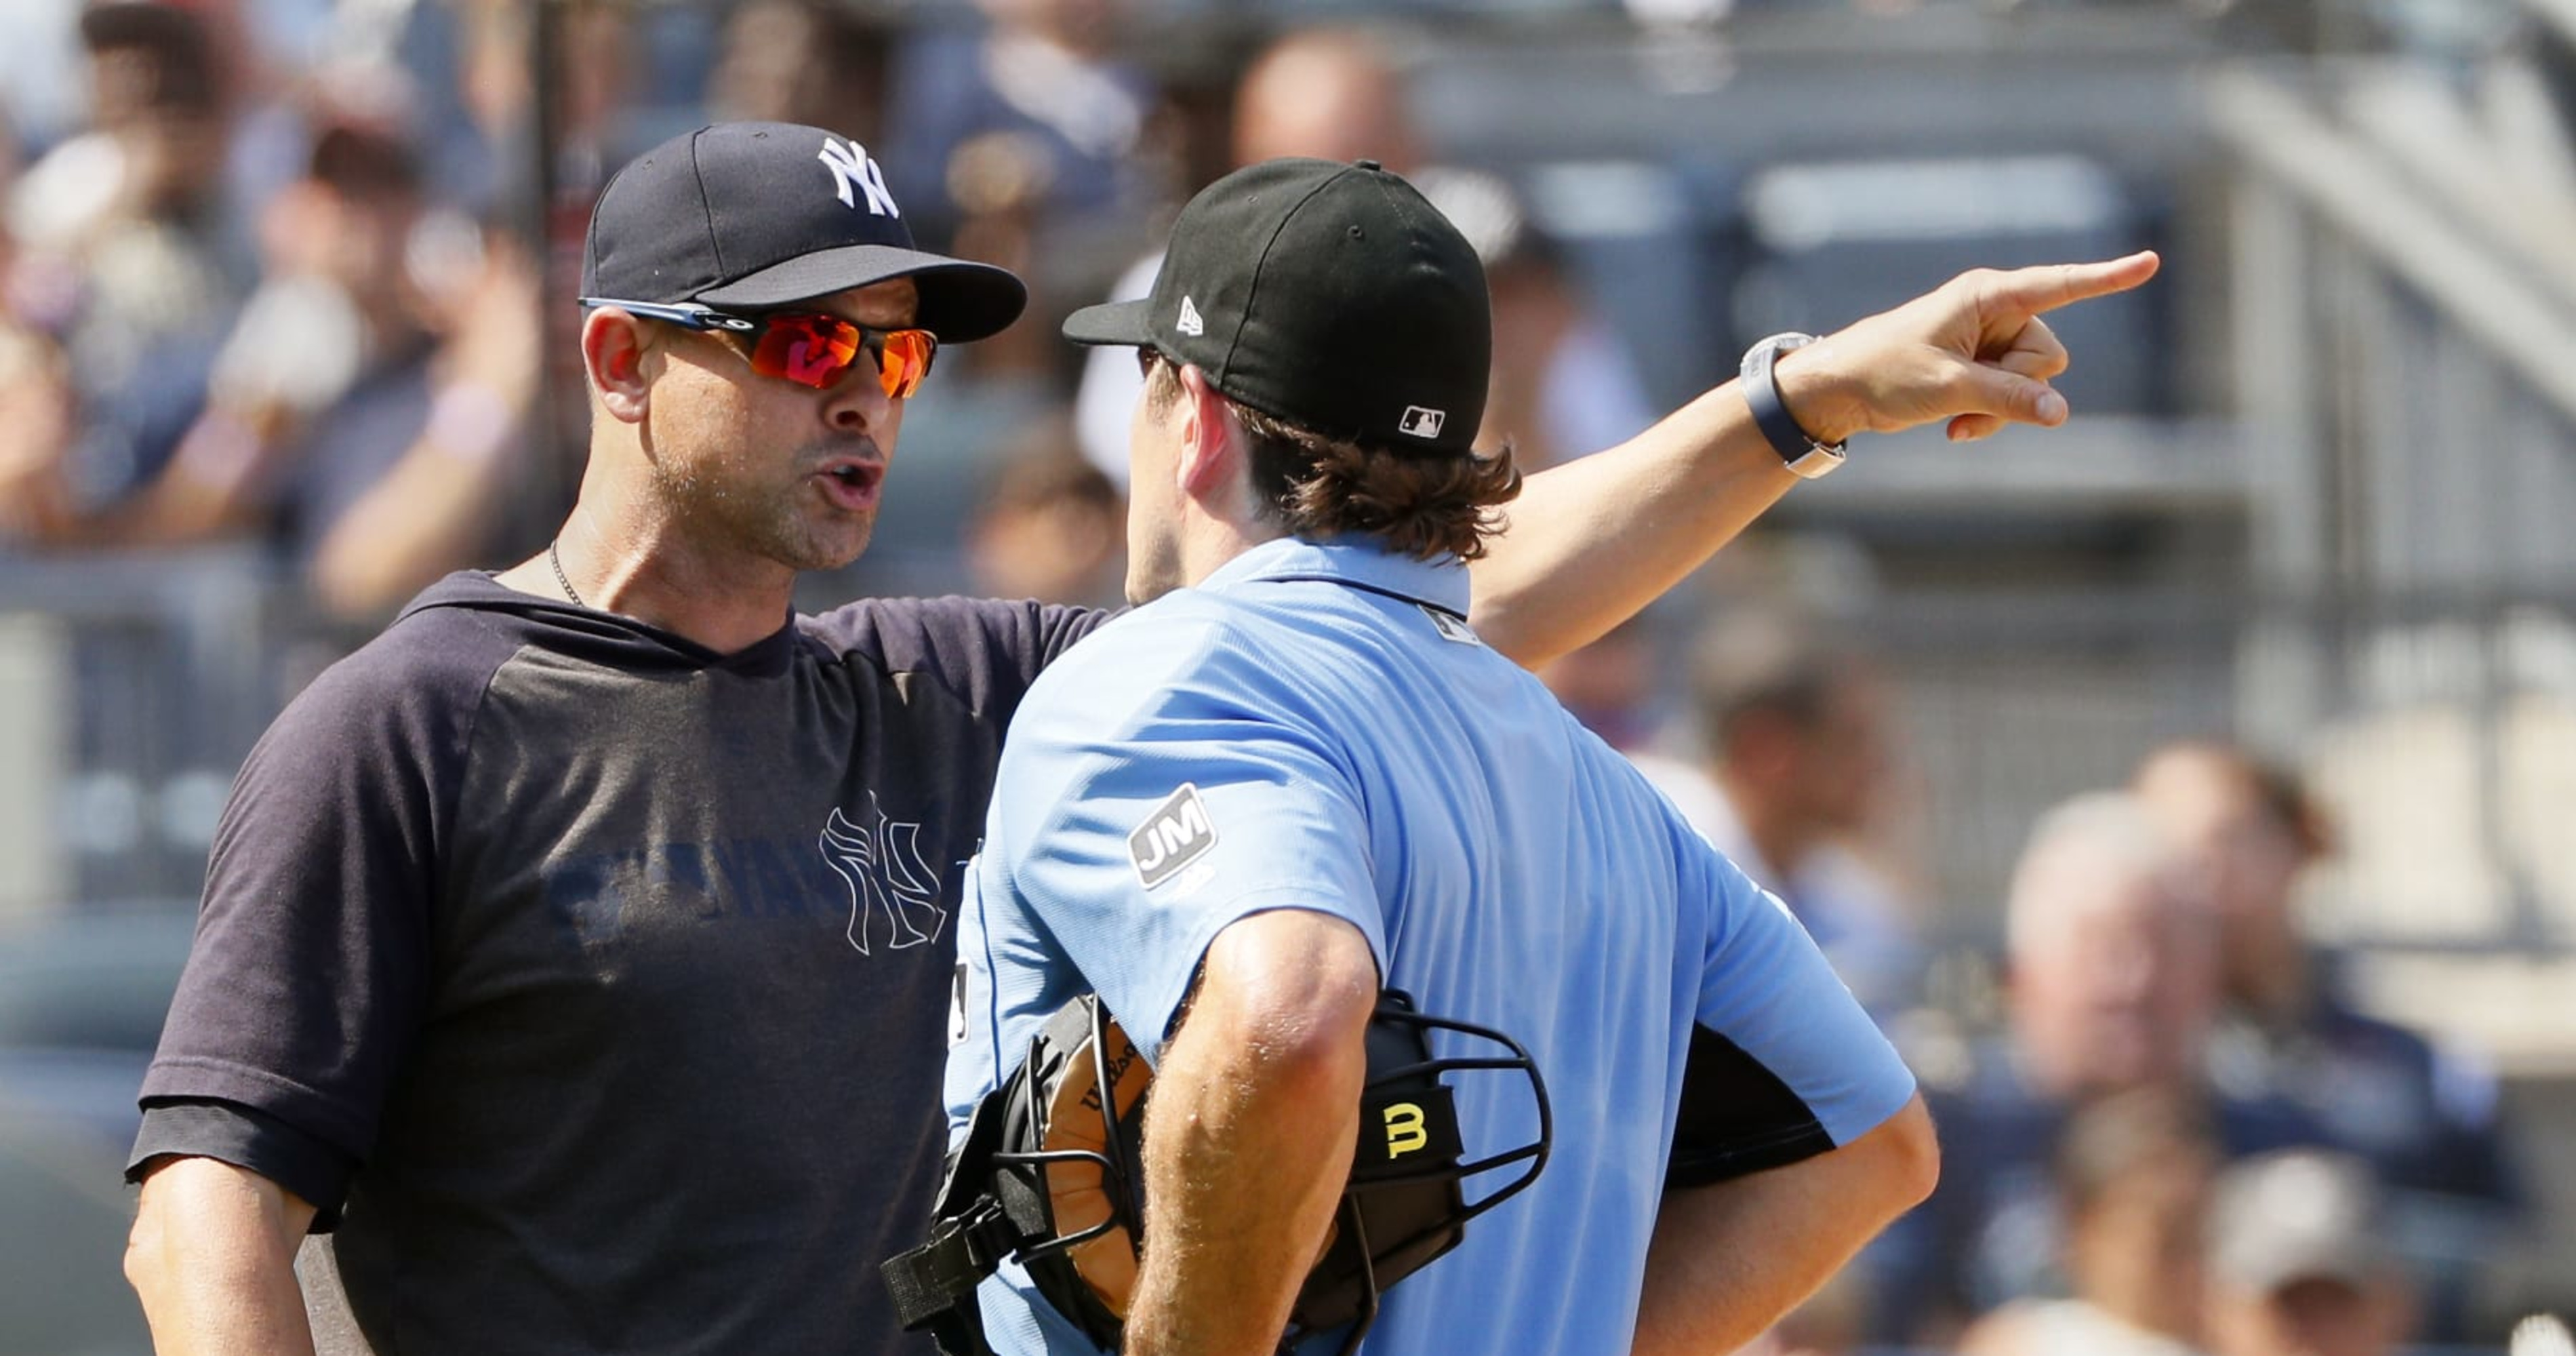 Yankees' Aaron Boone returns from 1-game suspension, hopes to